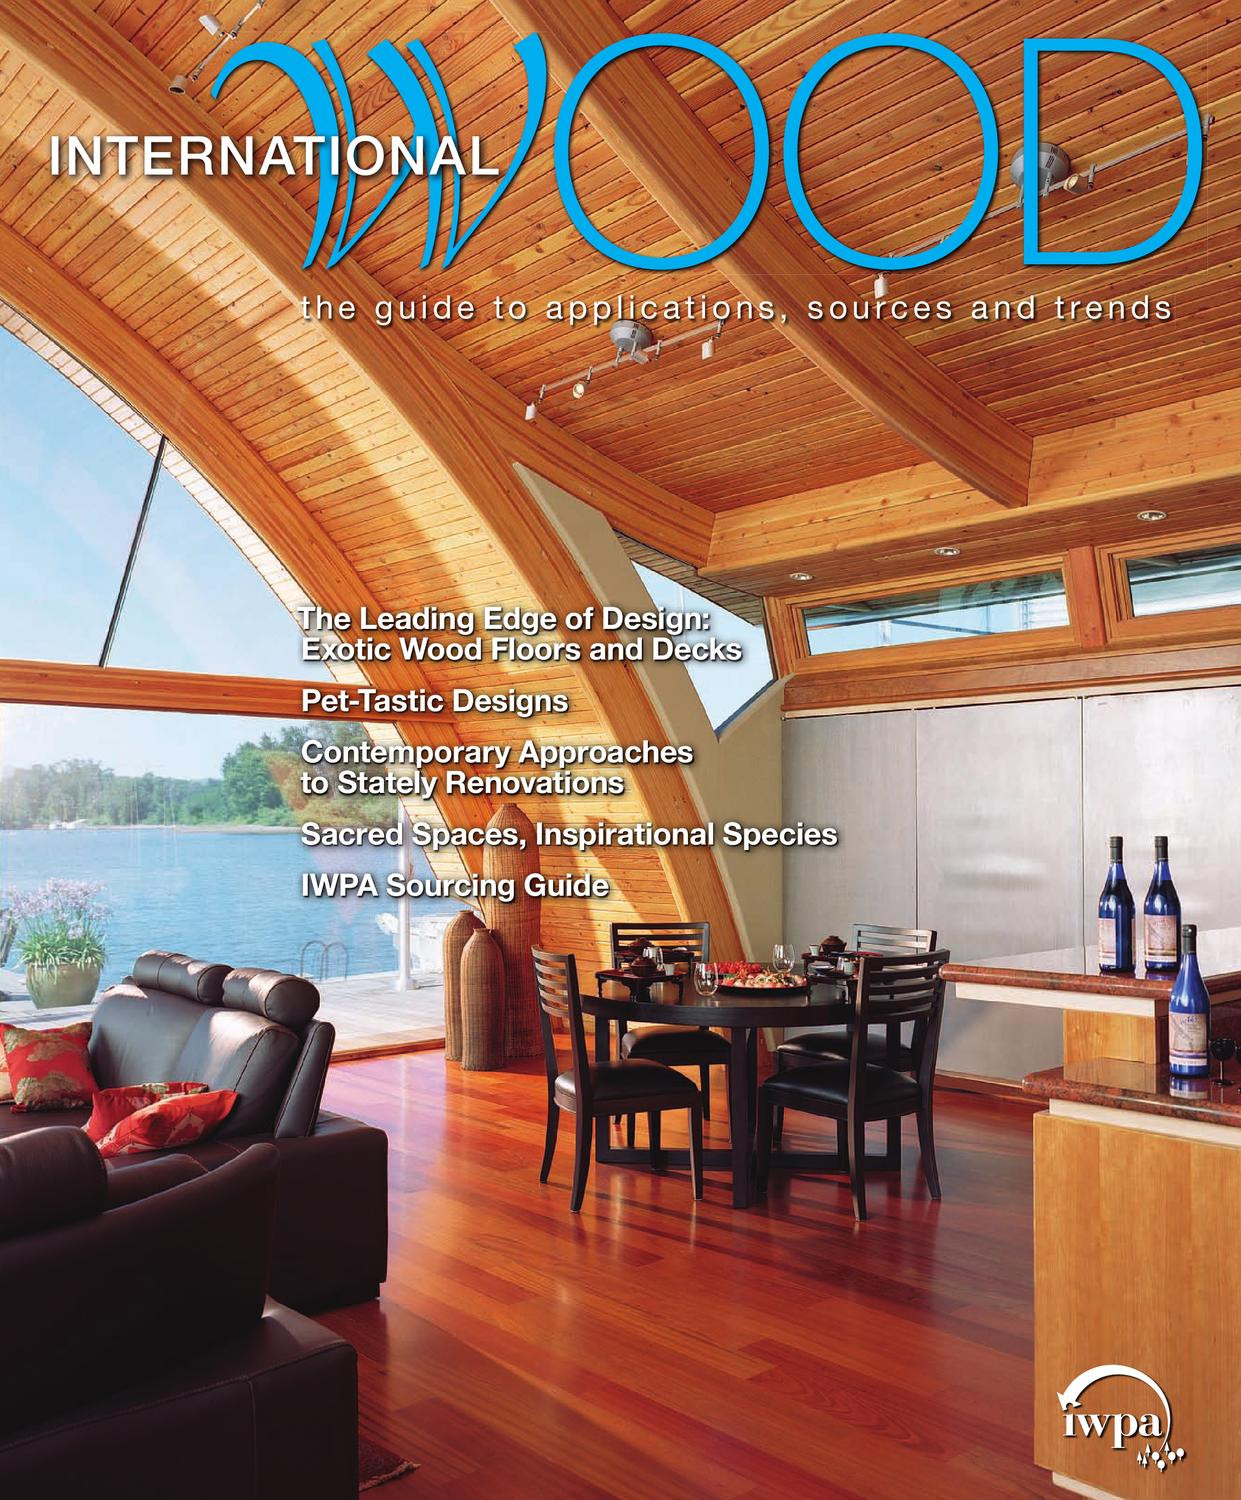 22 Recommended Kentwood Hardwood Flooring Reviews 2024 free download kentwood hardwood flooring reviews of international wood magazine 09 by bedford falls communications issuu for page 1